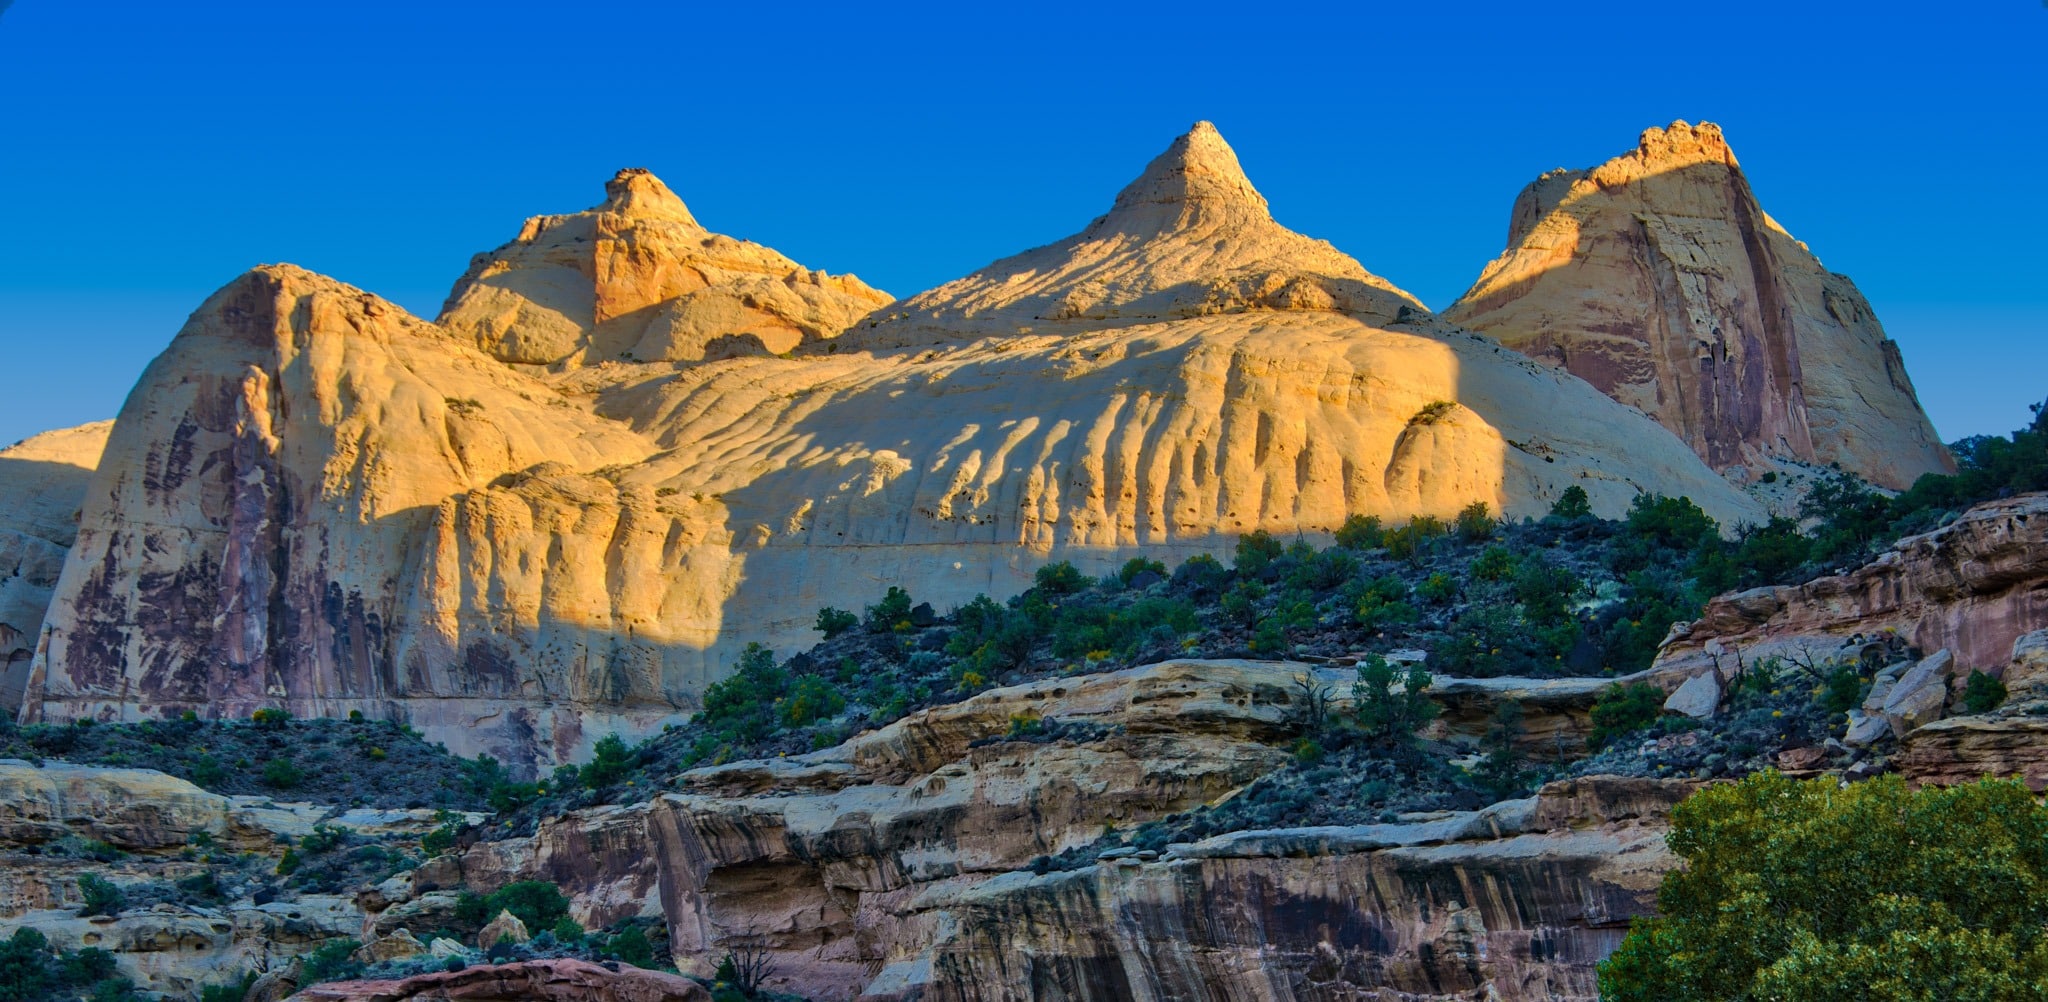 This view of Navajo Dome was taken at dawn from a pullout on Utah State Route 24 on the western edge of Capitol Reef National Park, Utah.